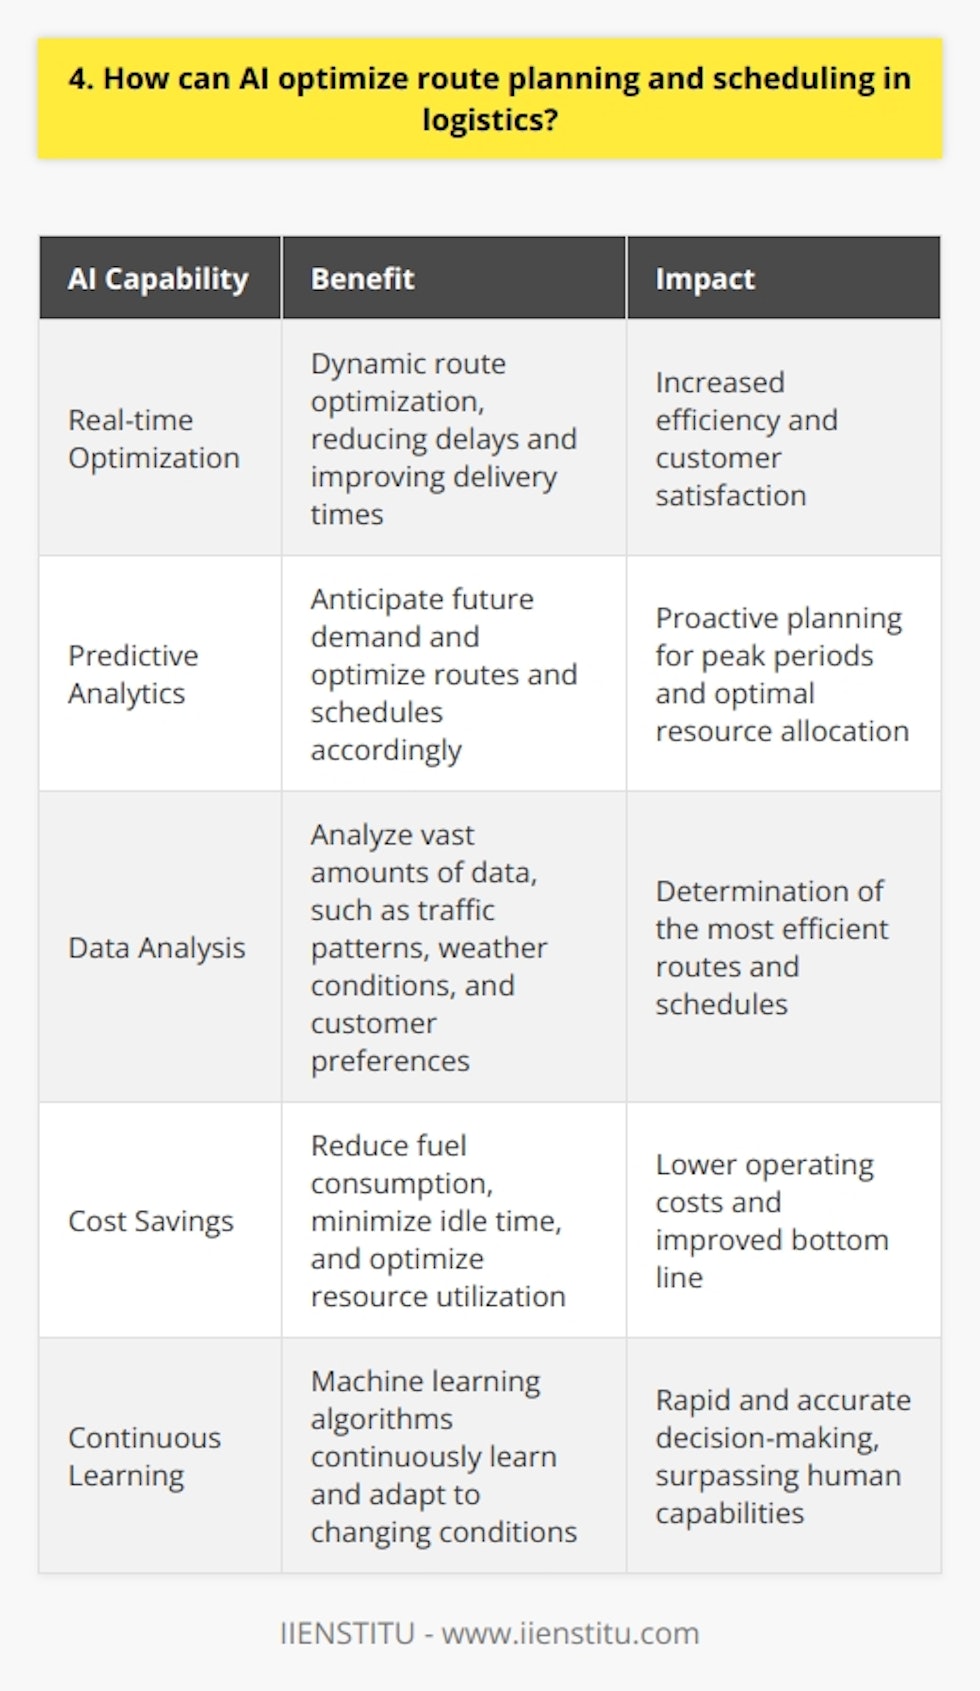 AI can optimize route planning and scheduling in logistics in several ways. It can analyze vast amounts of data, such as traffic patterns, weather conditions, and customer preferences, to determine the most efficient routes and schedules. Real-time Optimization By using machine learning algorithms, AI can continuously learn and adapt to changing conditions in real-time. This allows for dynamic route optimization, reducing delays and improving delivery times. Predictive Analytics AI can also use predictive analytics to anticipate future demand and optimize routes and schedules accordingly. This helps logistics companies to proactively plan for peak periods and ensure that they have the necessary resources in place. Customer Satisfaction By optimizing routes and schedules, AI can help logistics companies to improve customer satisfaction. Customers receive their deliveries faster and more reliably, which can lead to increased loyalty and repeat business. Cost Savings AI-powered route optimization can also lead to significant cost savings for logistics companies. By reducing fuel consumption, minimizing idle time, and optimizing resource utilization, companies can lower their operating costs and improve their bottom line. In my experience, implementing AI-powered route optimization has been a game-changer for the logistics industry. Its amazing to see how quickly and accurately AI can analyze data and make decisions that would take humans hours or even days to figure out. Of course, there are challenges to implementing AI in logistics, such as ensuring data privacy and security. But overall, I believe that AI has the potential to revolutionize the industry and deliver significant benefits to both logistics companies and their customers.